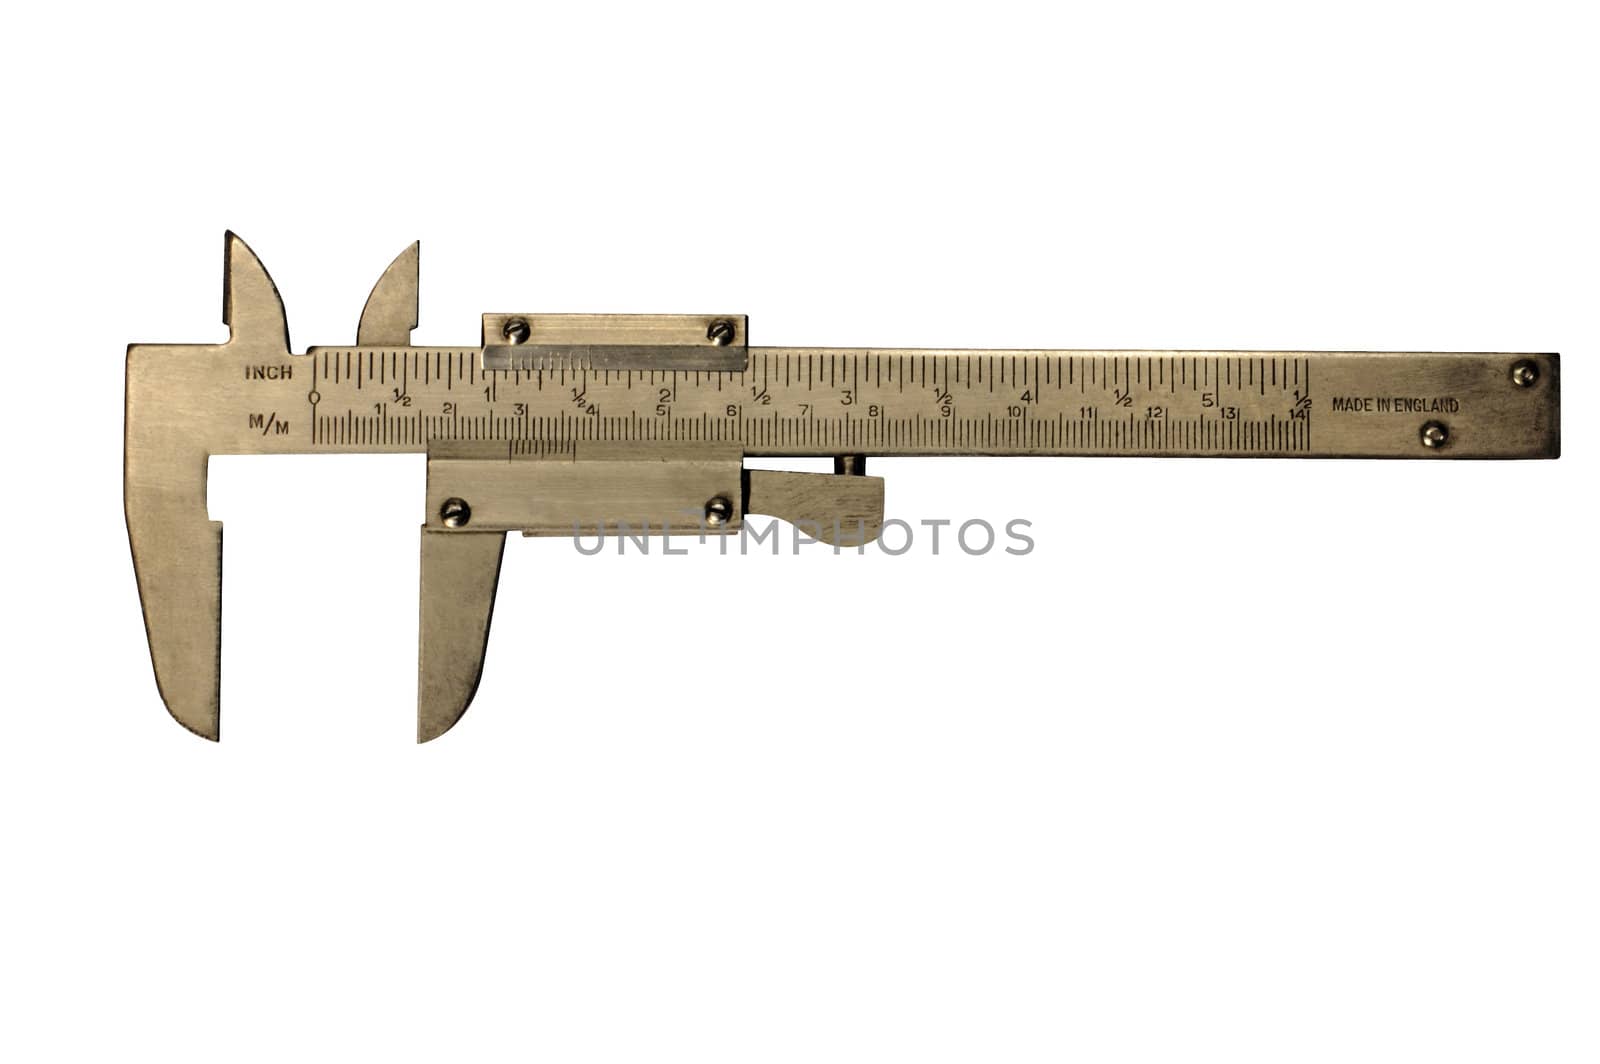 A set of vernier calipers straight out of a workshop and  slightly stained and scratched from use. The real thing! Clipping path included with the file.